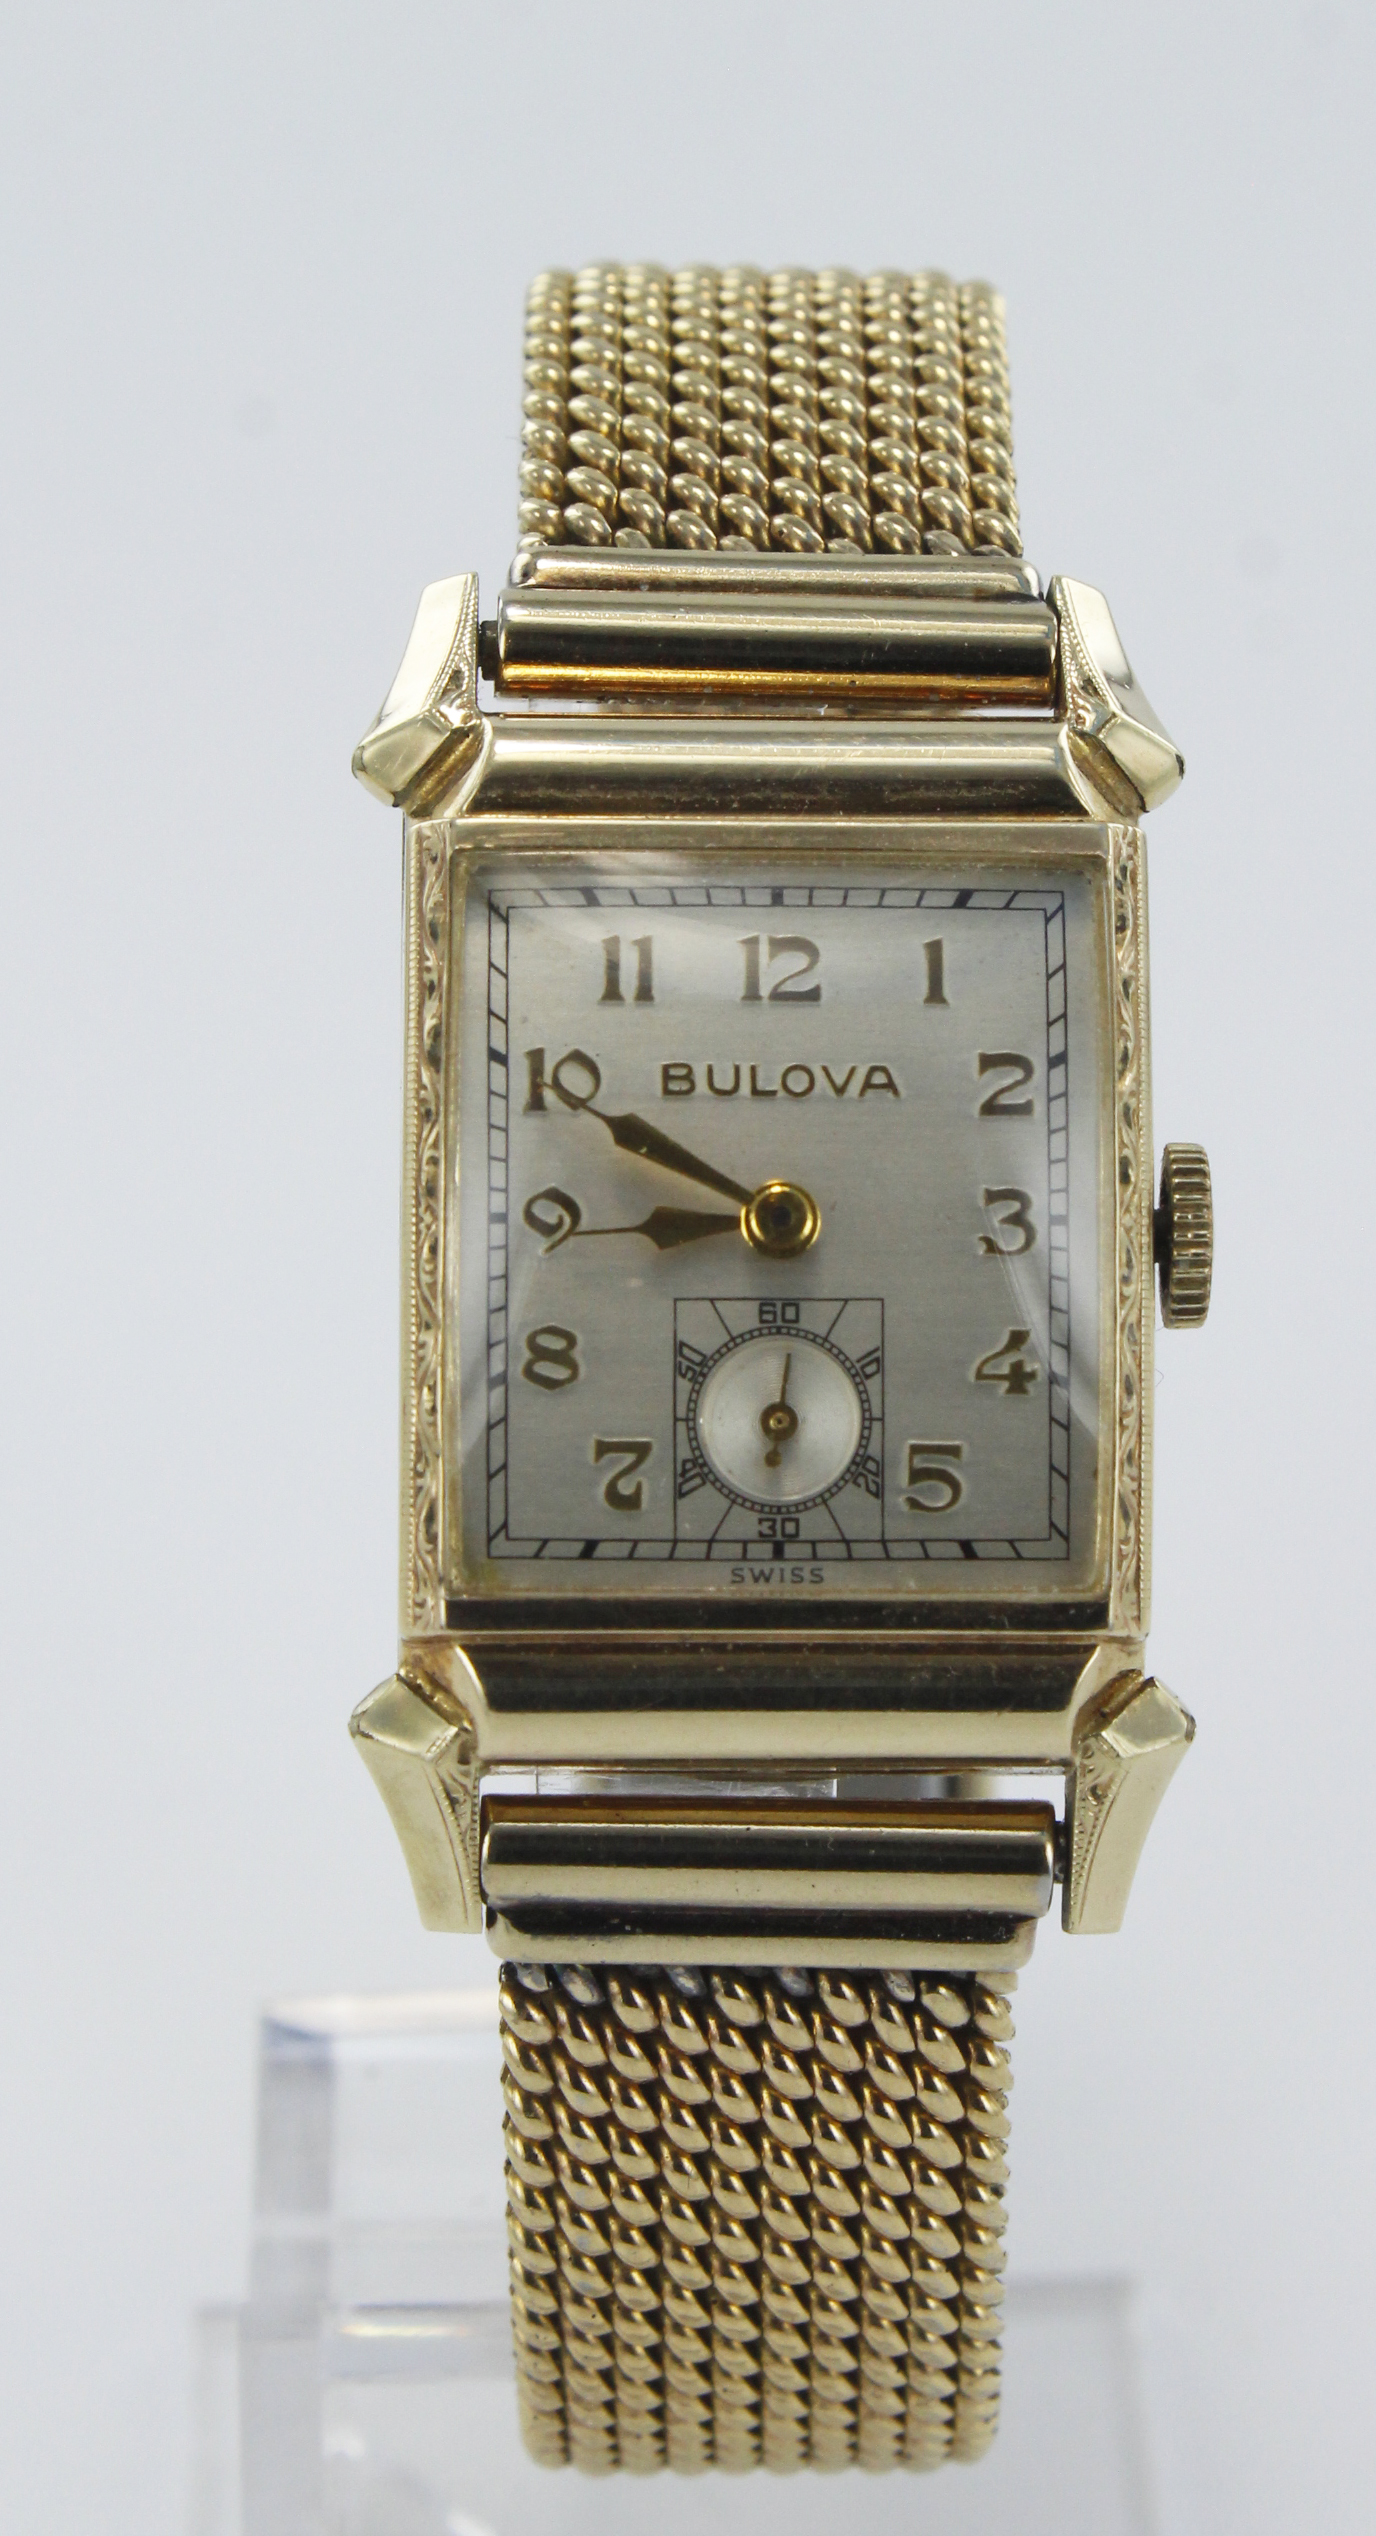 Gents gold plated and stainless steel cased Bulova manual wind wristwatch. The silvered dial with